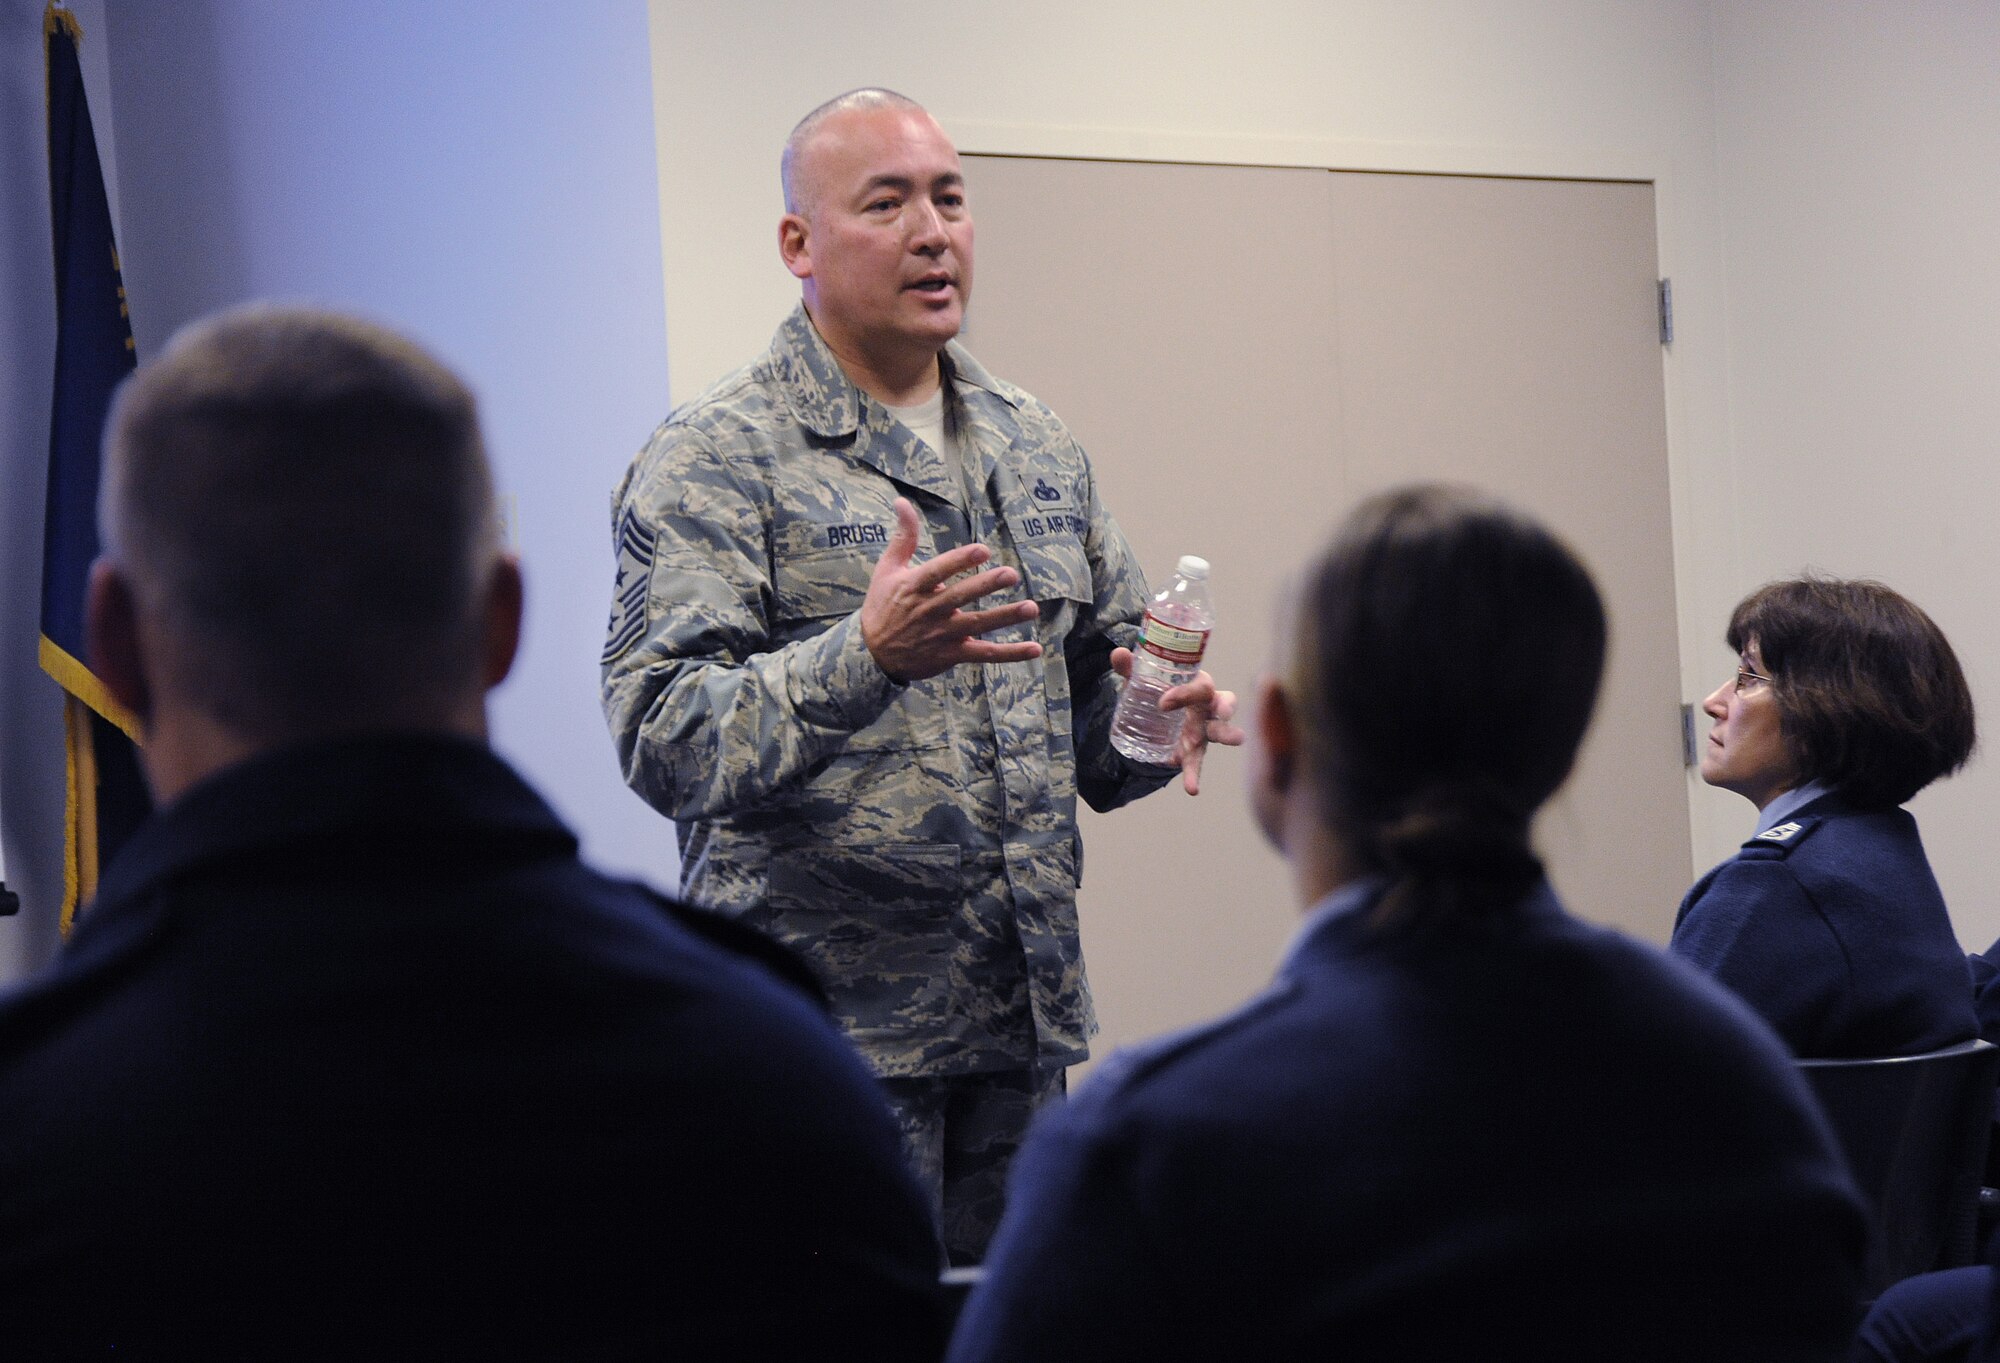 Chief Master Sgt. Mitchell O. Brush, Senior Enlisted Advisor for the National Guard Bureau leads a town hall event at the Portland Air National Guard Base, Ore., Jan. 5, 2015. During the town hall, he addressed the structure of the National Guard Bureau, ongoing changes and challenges that Soldiers and Airmen face going into the New Year. (U.S. Air National Guard photo by Tech. Sgt. John Hughel, 142nd Fighter Wing Public Affairs/Released)